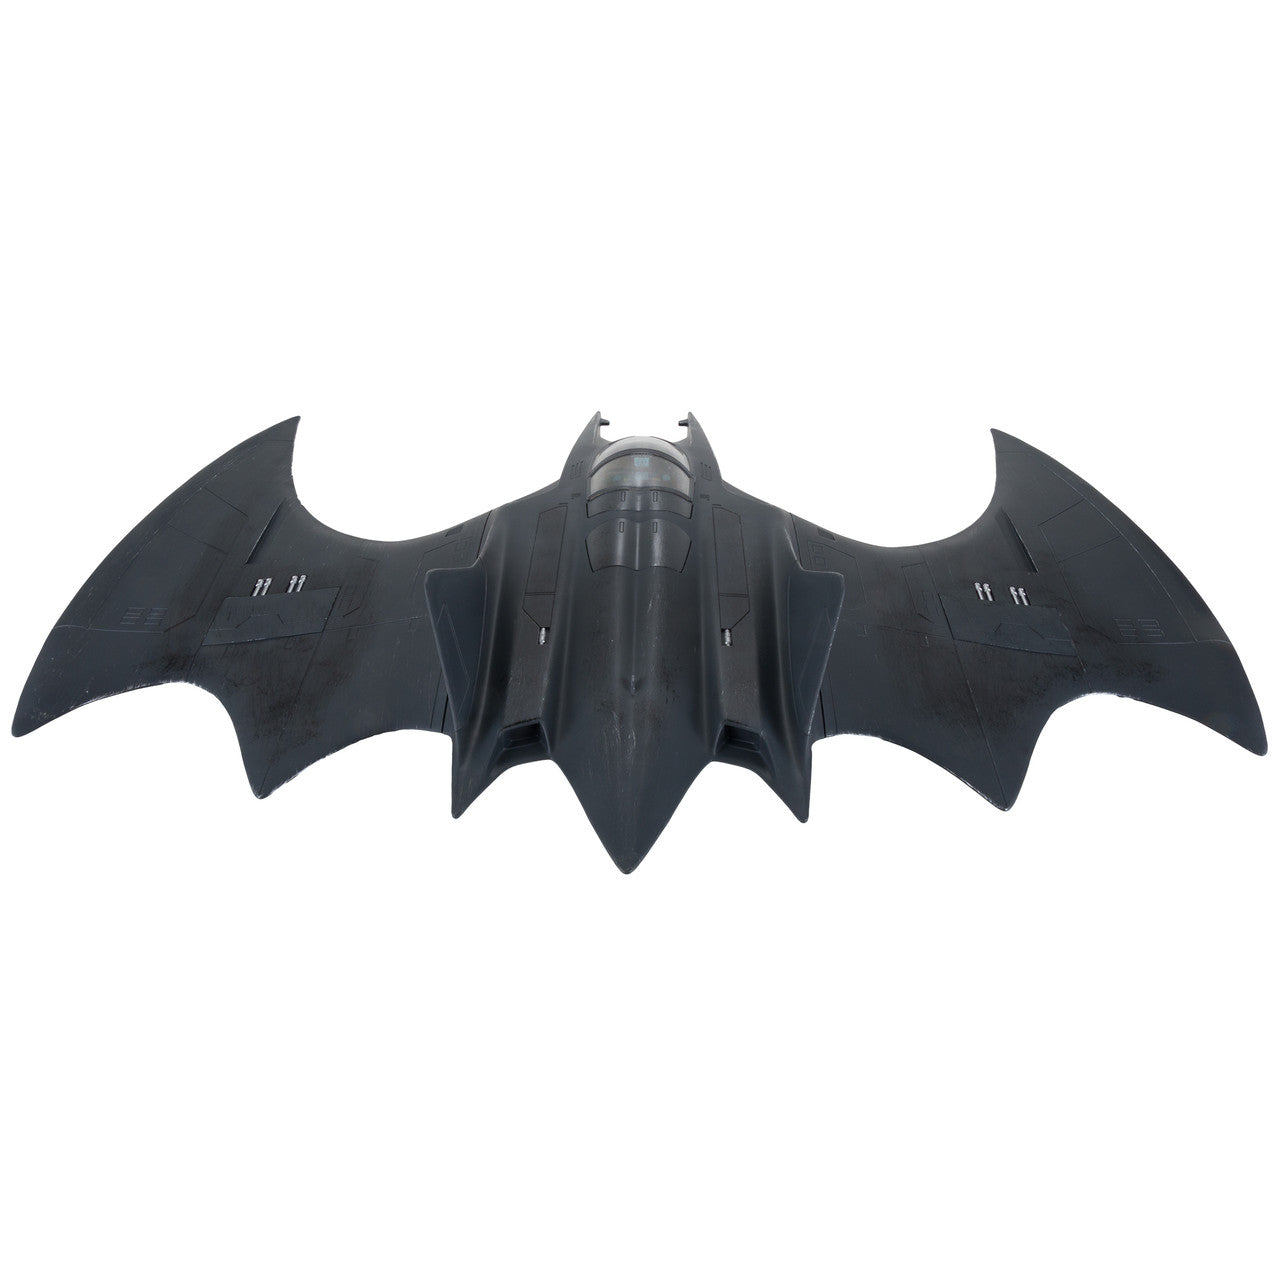 BATWING (GOLD LABEL) (THE FLASH MOVIE) front view - heretoserveyou